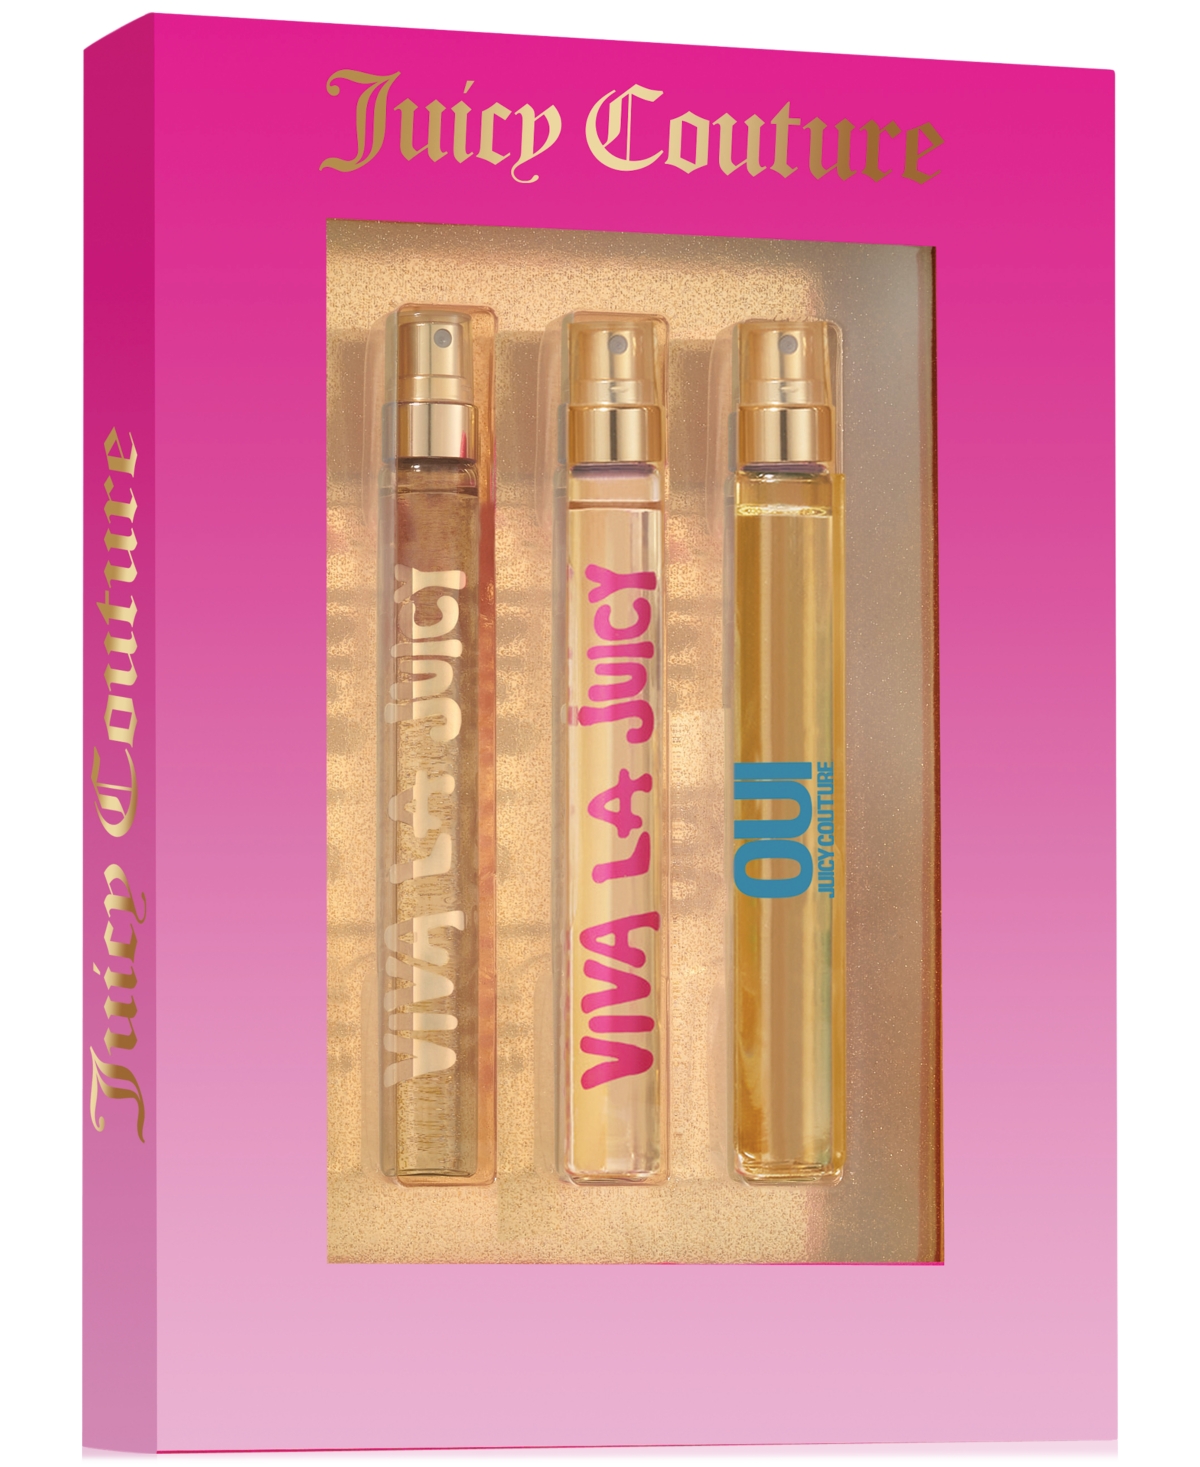 Juicy Couture 3-pc. Travel Spray Gift Set